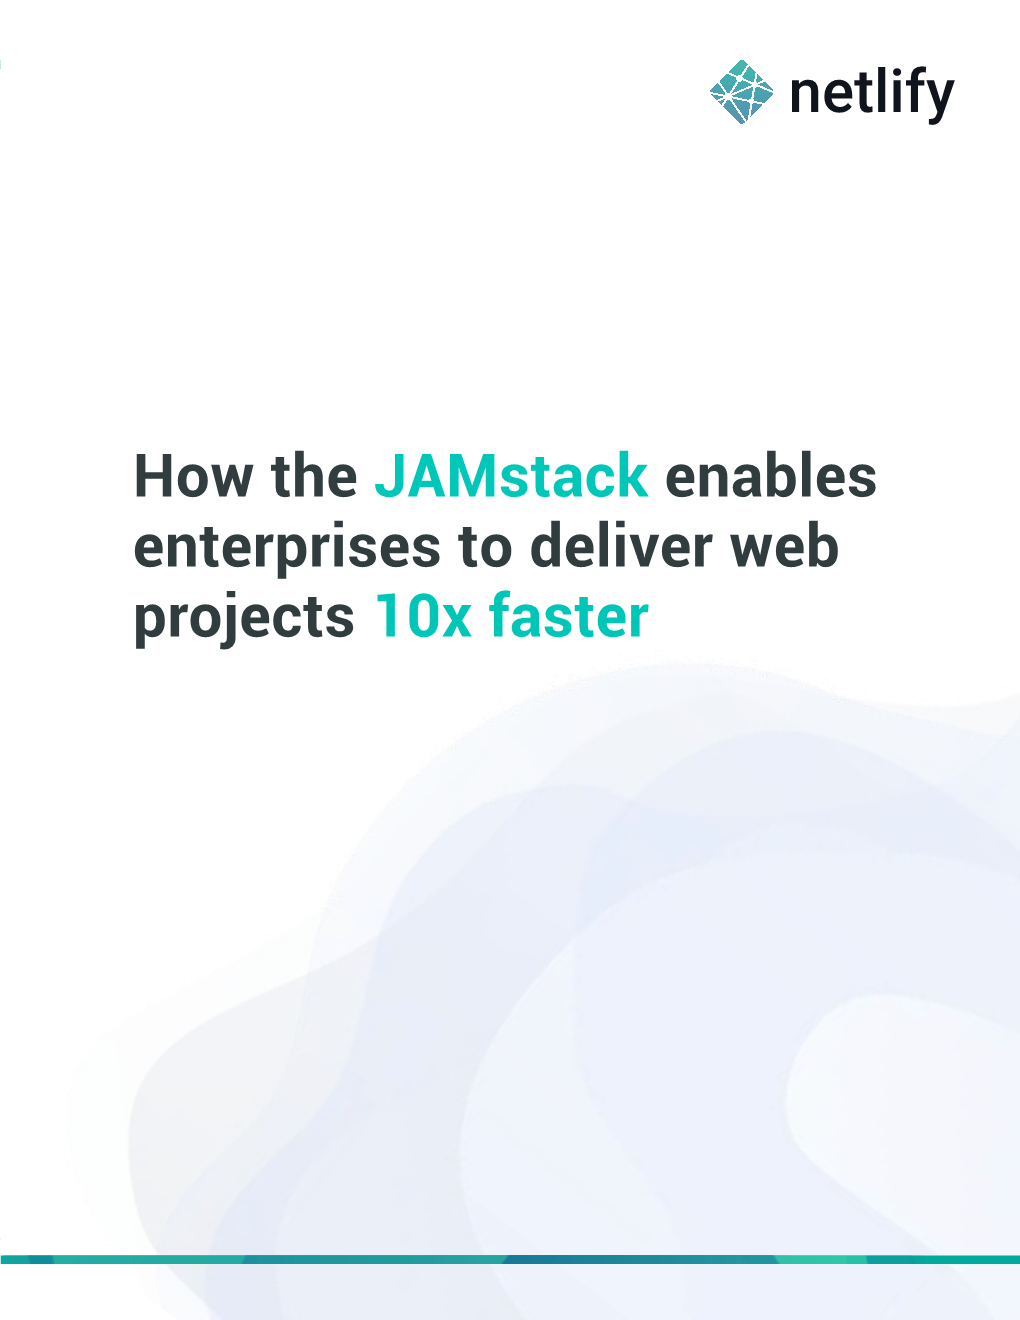 How the Jamstack Enables Enterprises to Deliver Web Projects 10X Faster